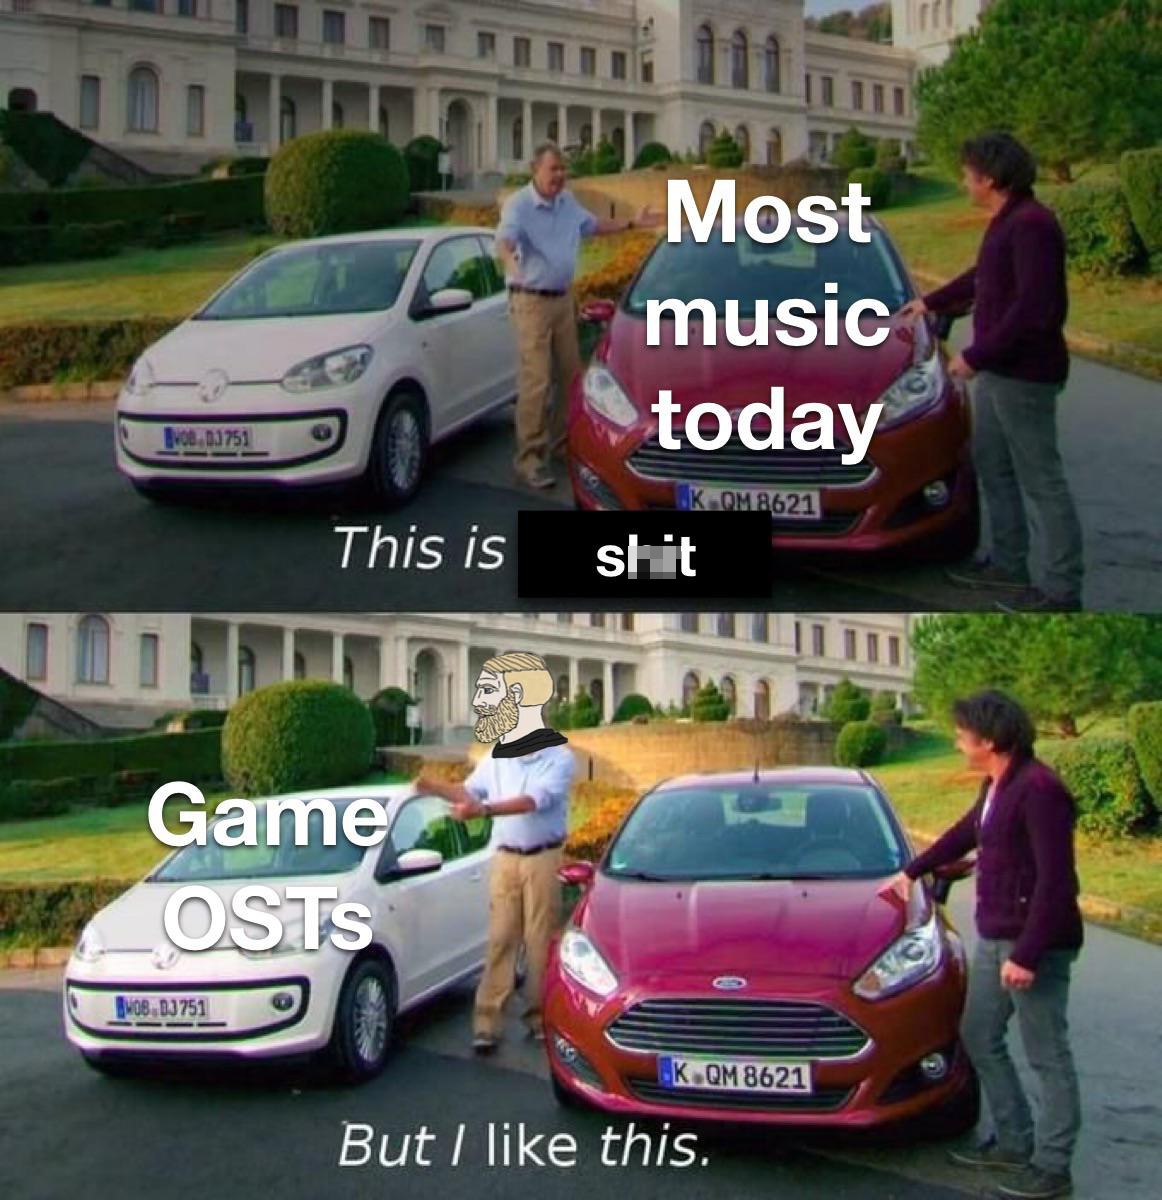 gaming memes  - livadia park - Most music today SERIES2 shit 3351 This is Ma Game. Costs He A.0371 K.Qm 3621 But I this.